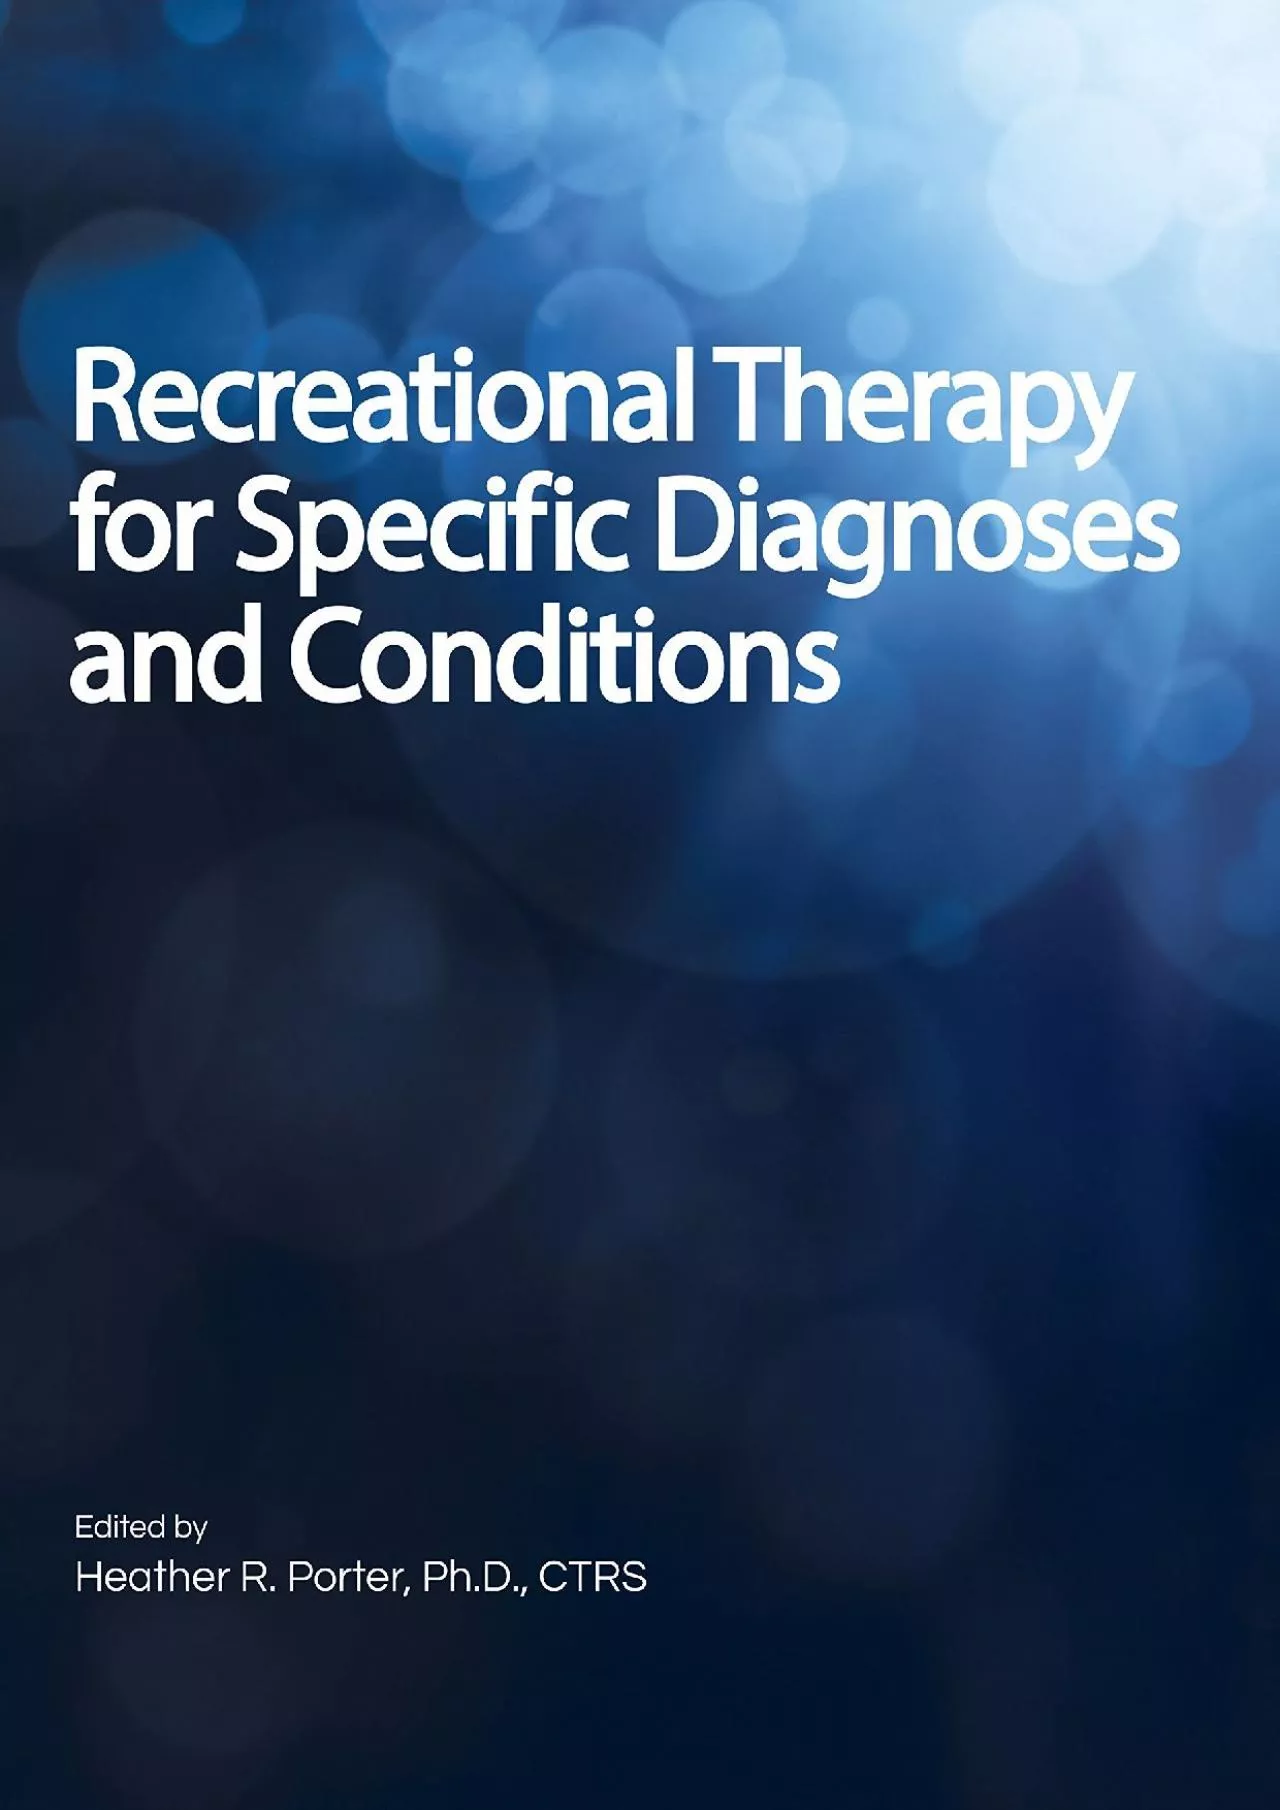 (BOOS)-Recreational Therapy for Specific Diagnoses and Conditions